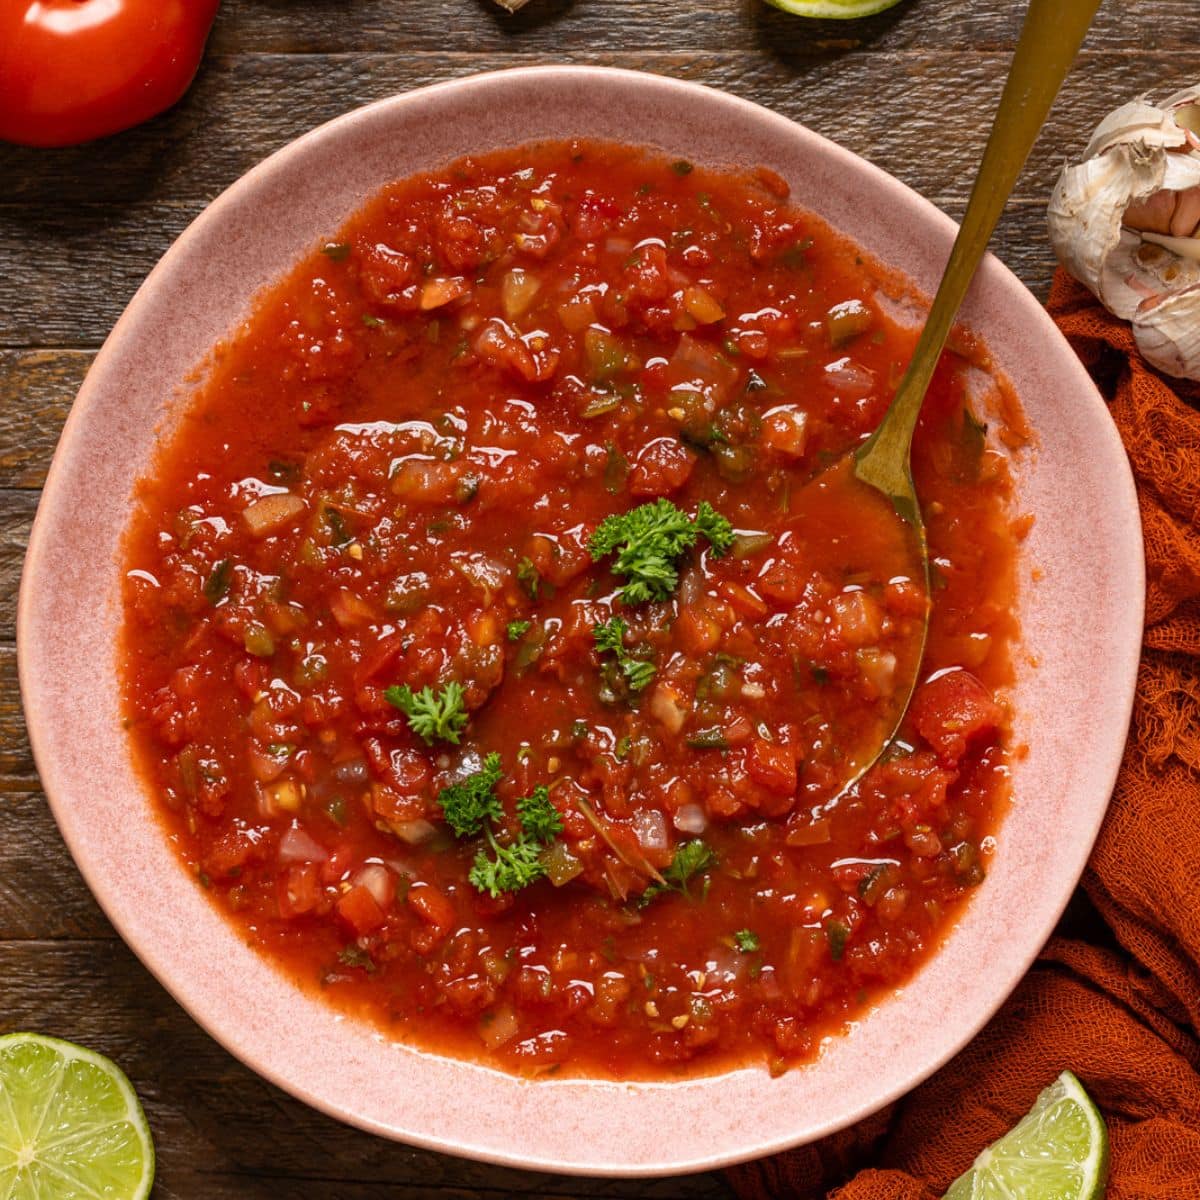 Bowl of salsa with a spoon on a wood table.